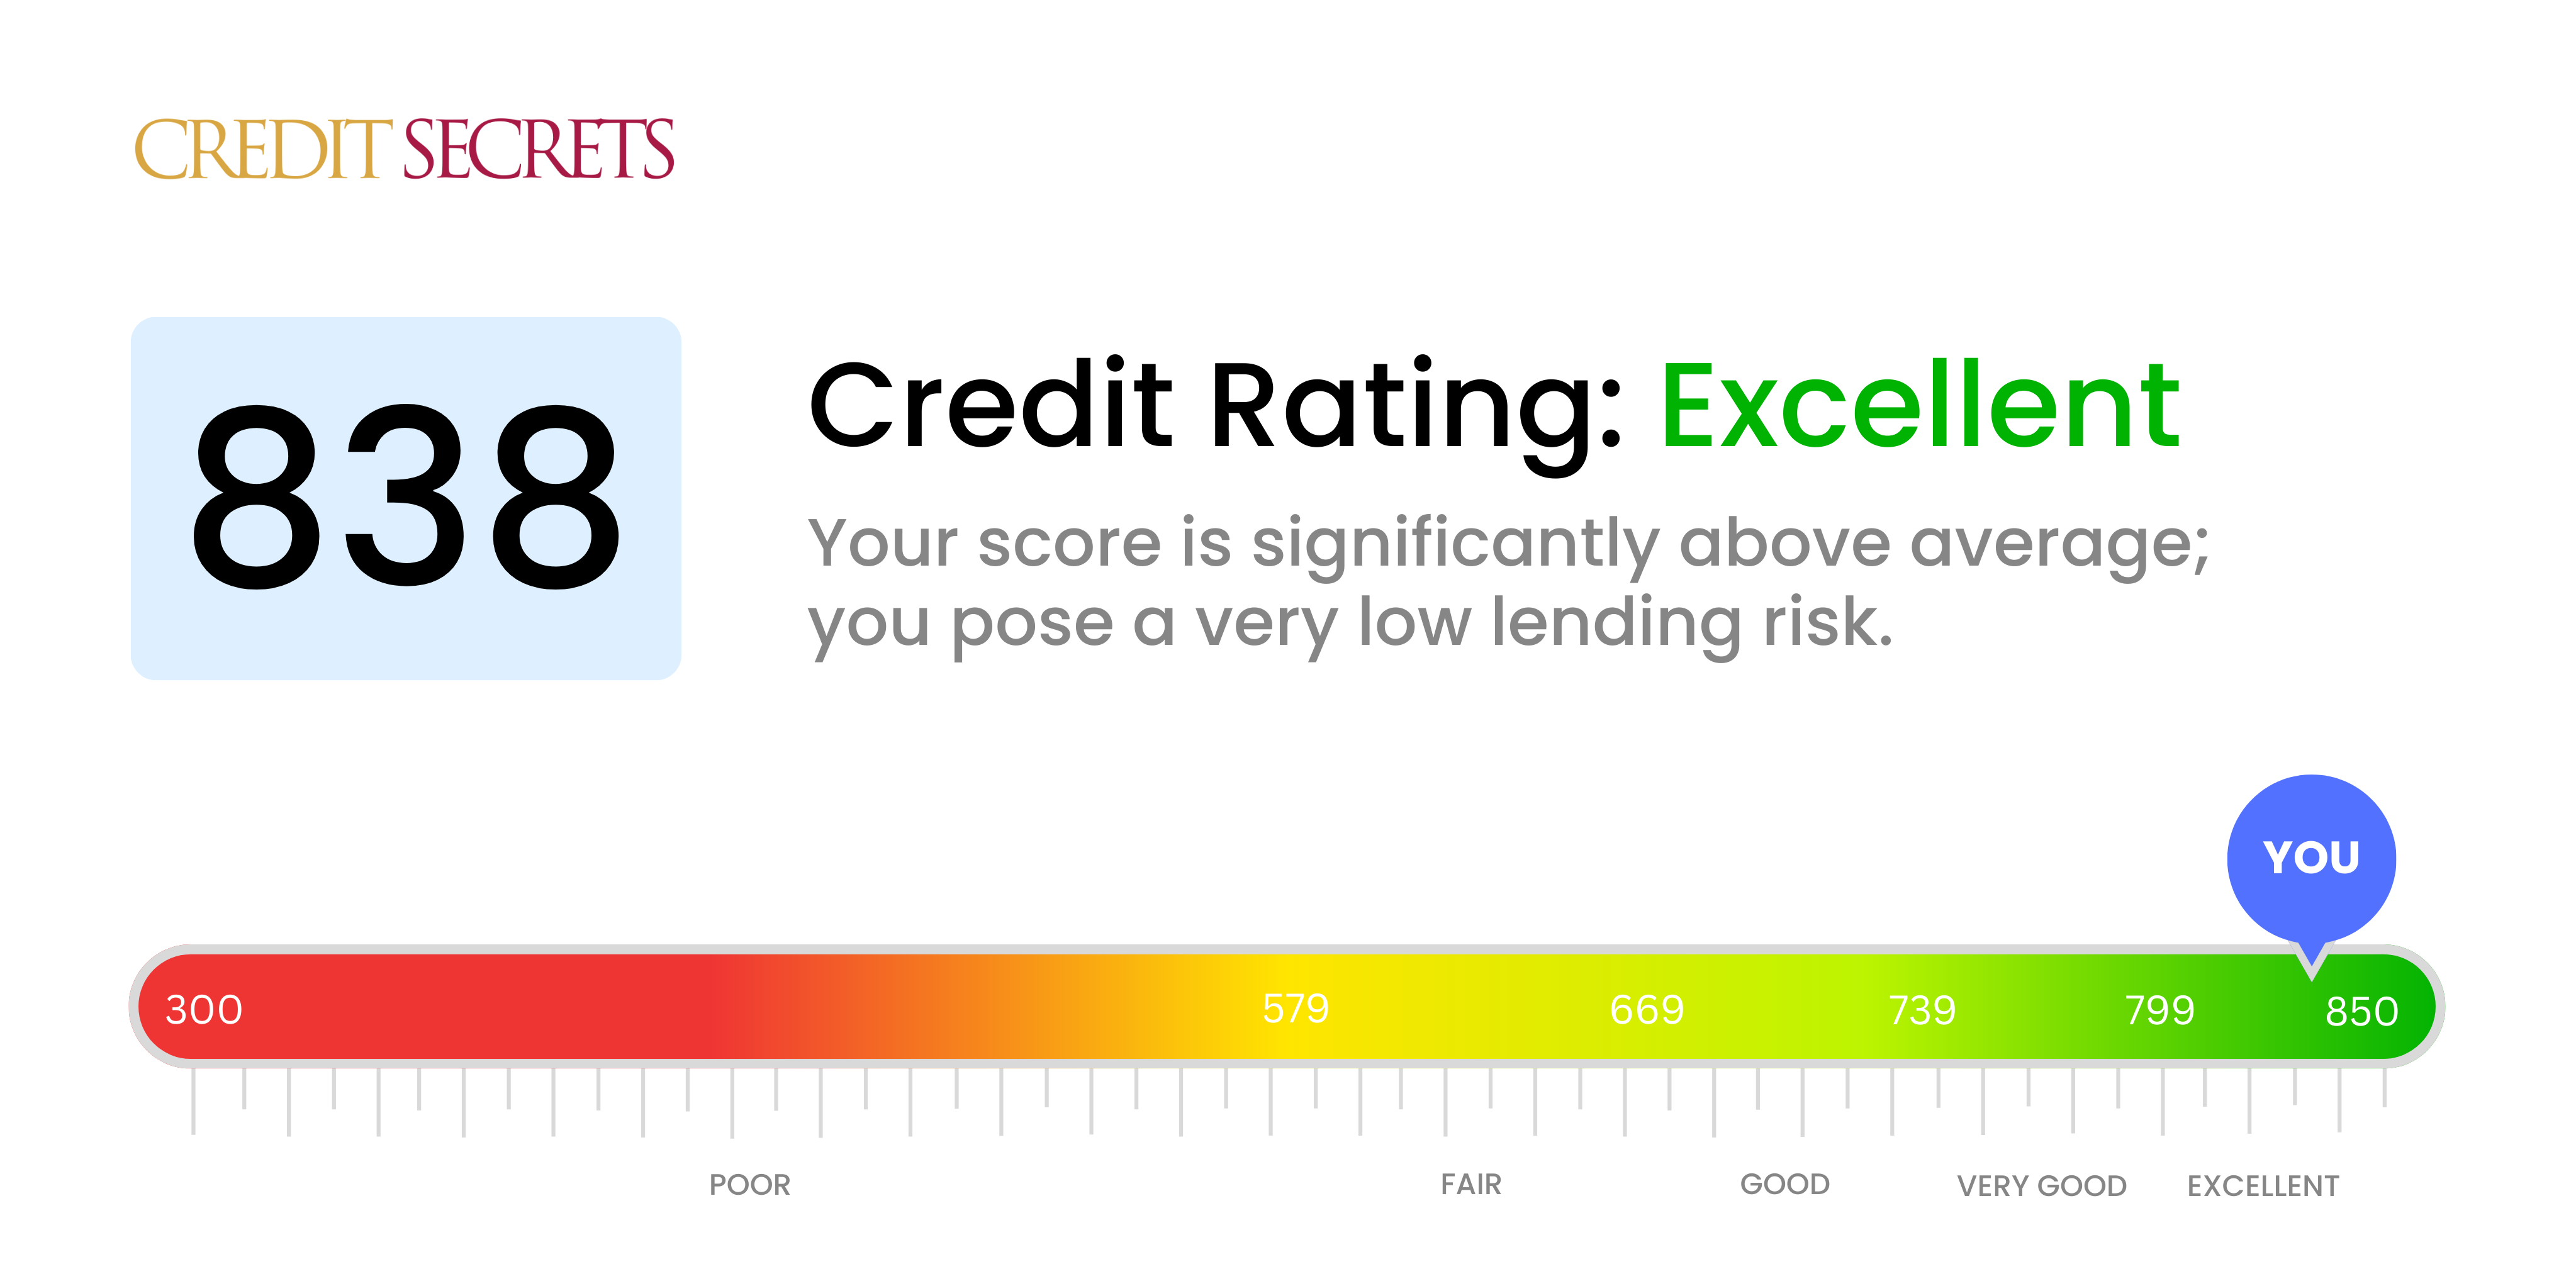 Is 838 a good credit score?